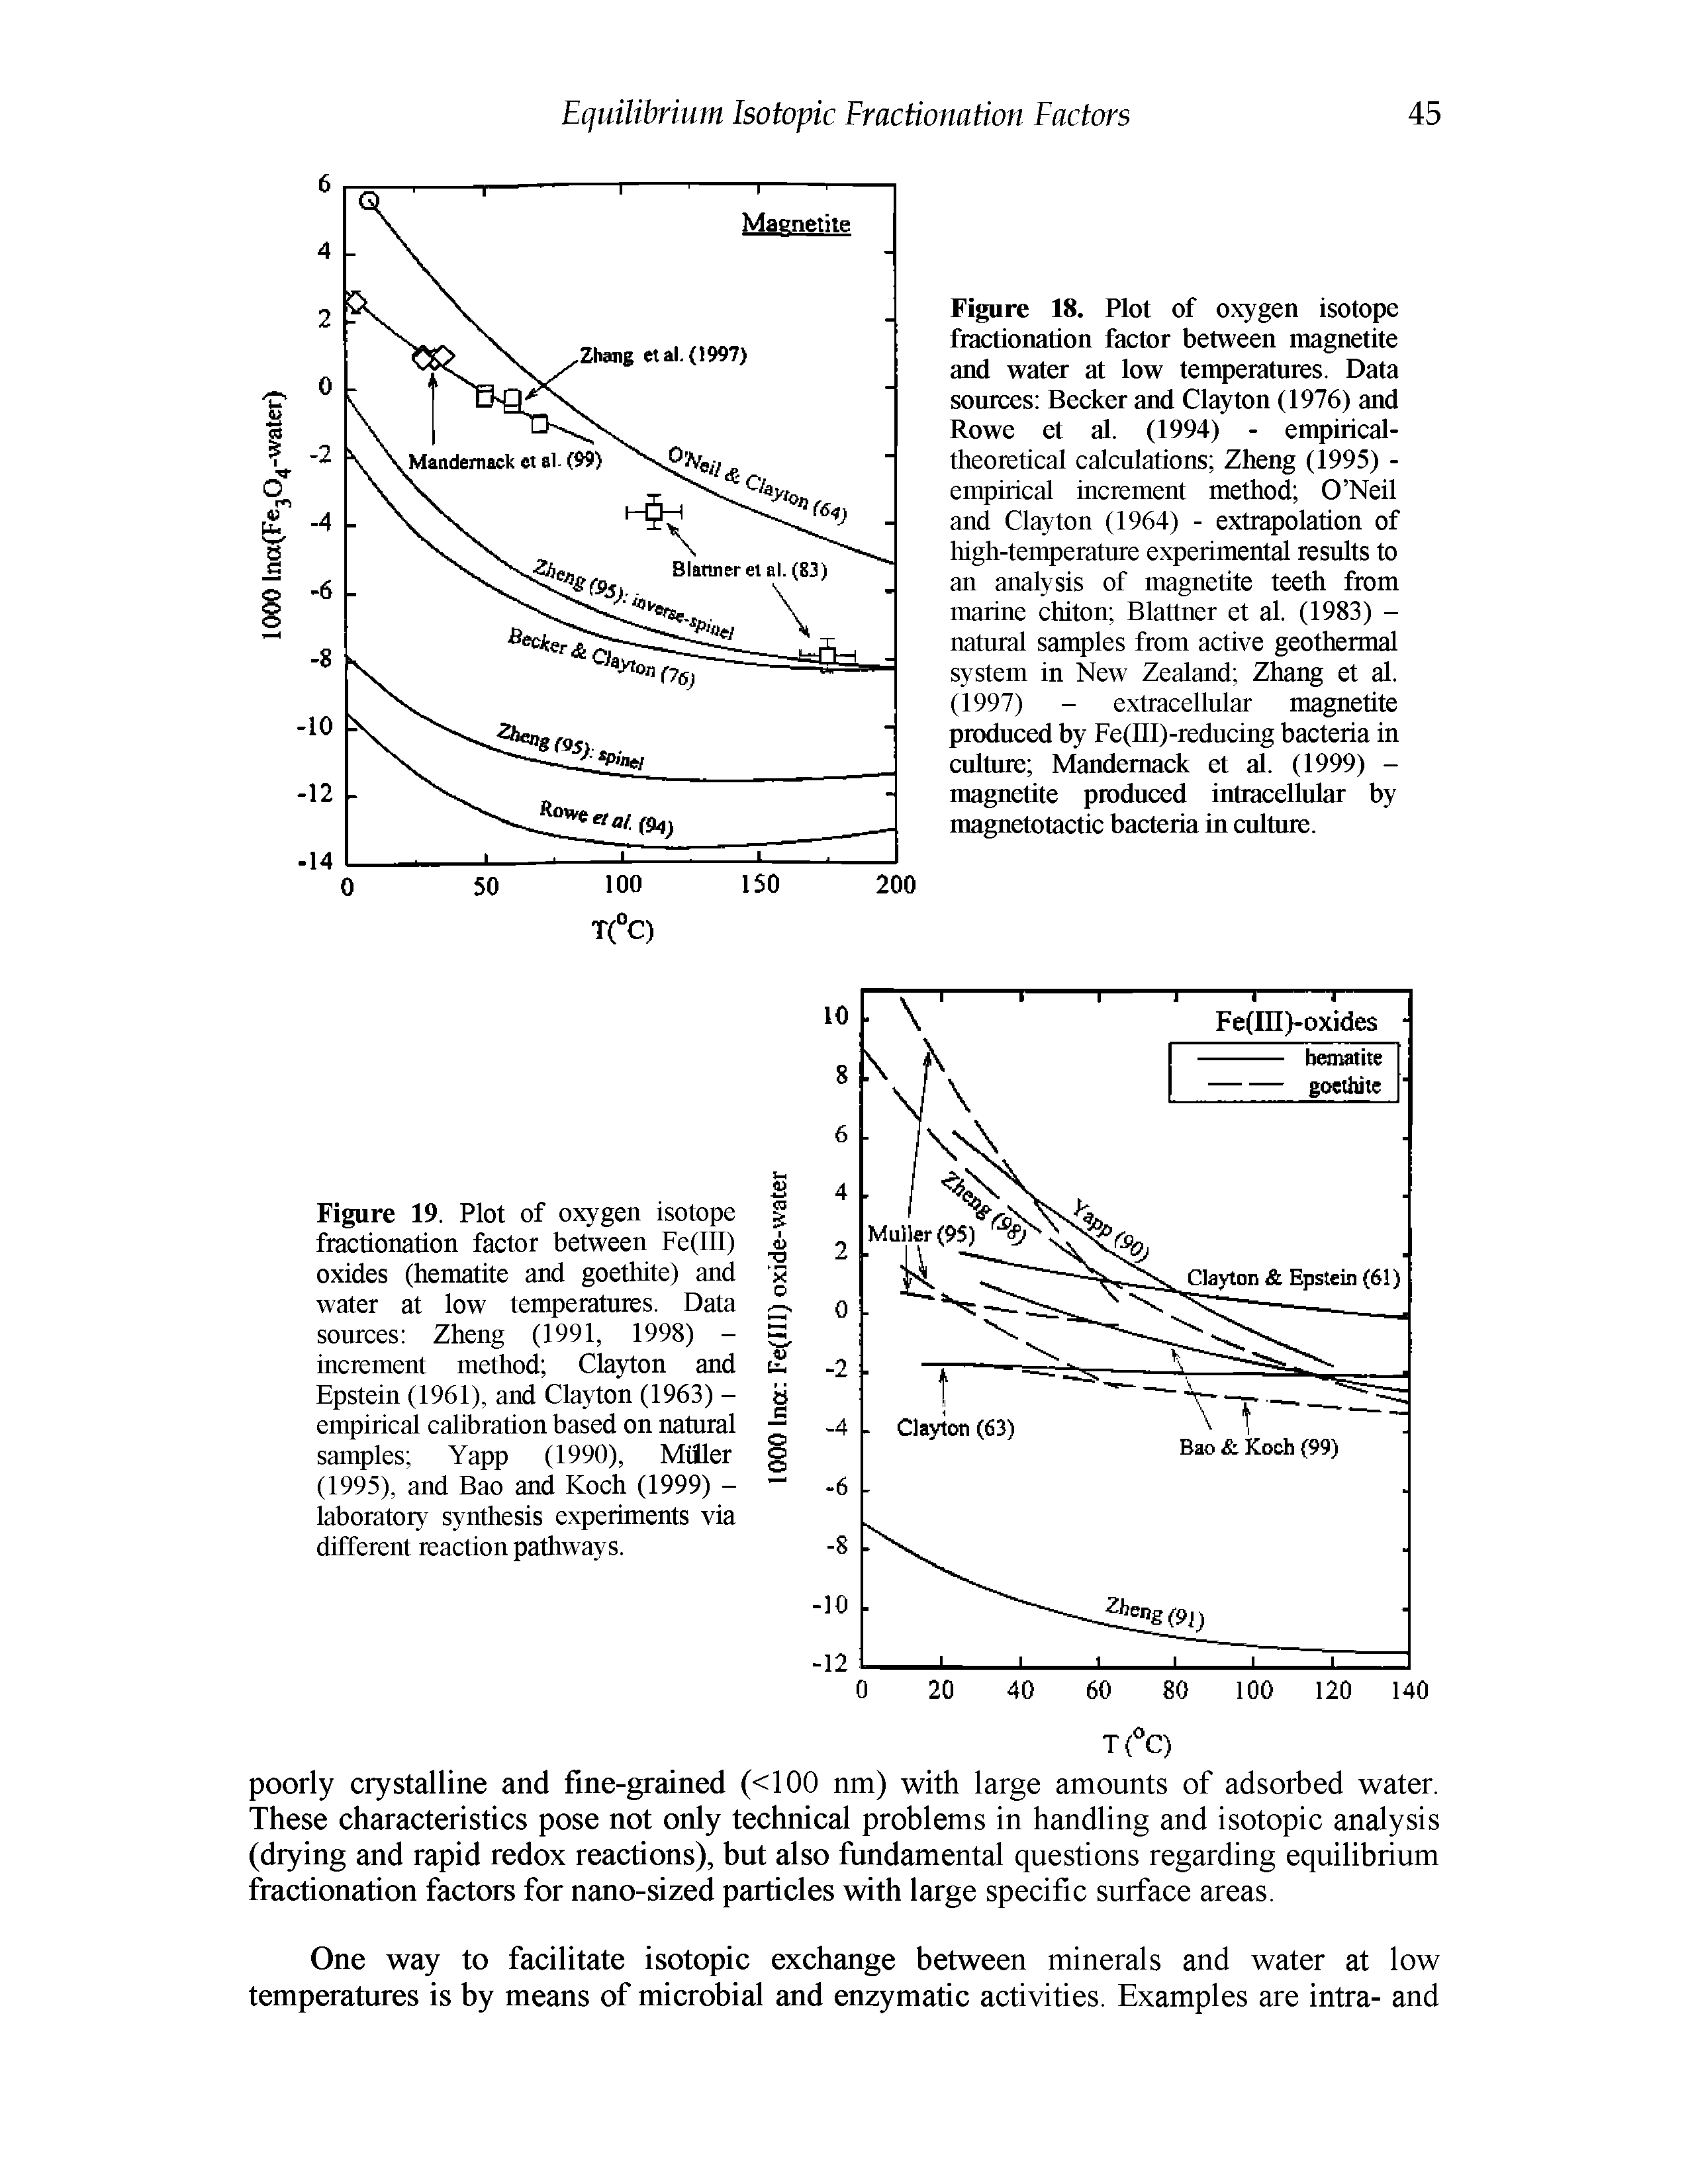 Figure 18. Plot of oxygen isotope fractionation factor between magnetite and water at low temperatures. Data sources Becker and Clayton (1976) and Rowe et al. (1994) - empirical-theoretical calculations Zheng (1995) -empirical increment method O Neil and Clayton (1964) - extrapolation of high-temperature experimental results to an analysis of magnetite teeth from marine chiton Blattner et al. (1983) -natural samples from active geothermal system in New Zealand Zhang et al. (1997) - extracellular magnetite...